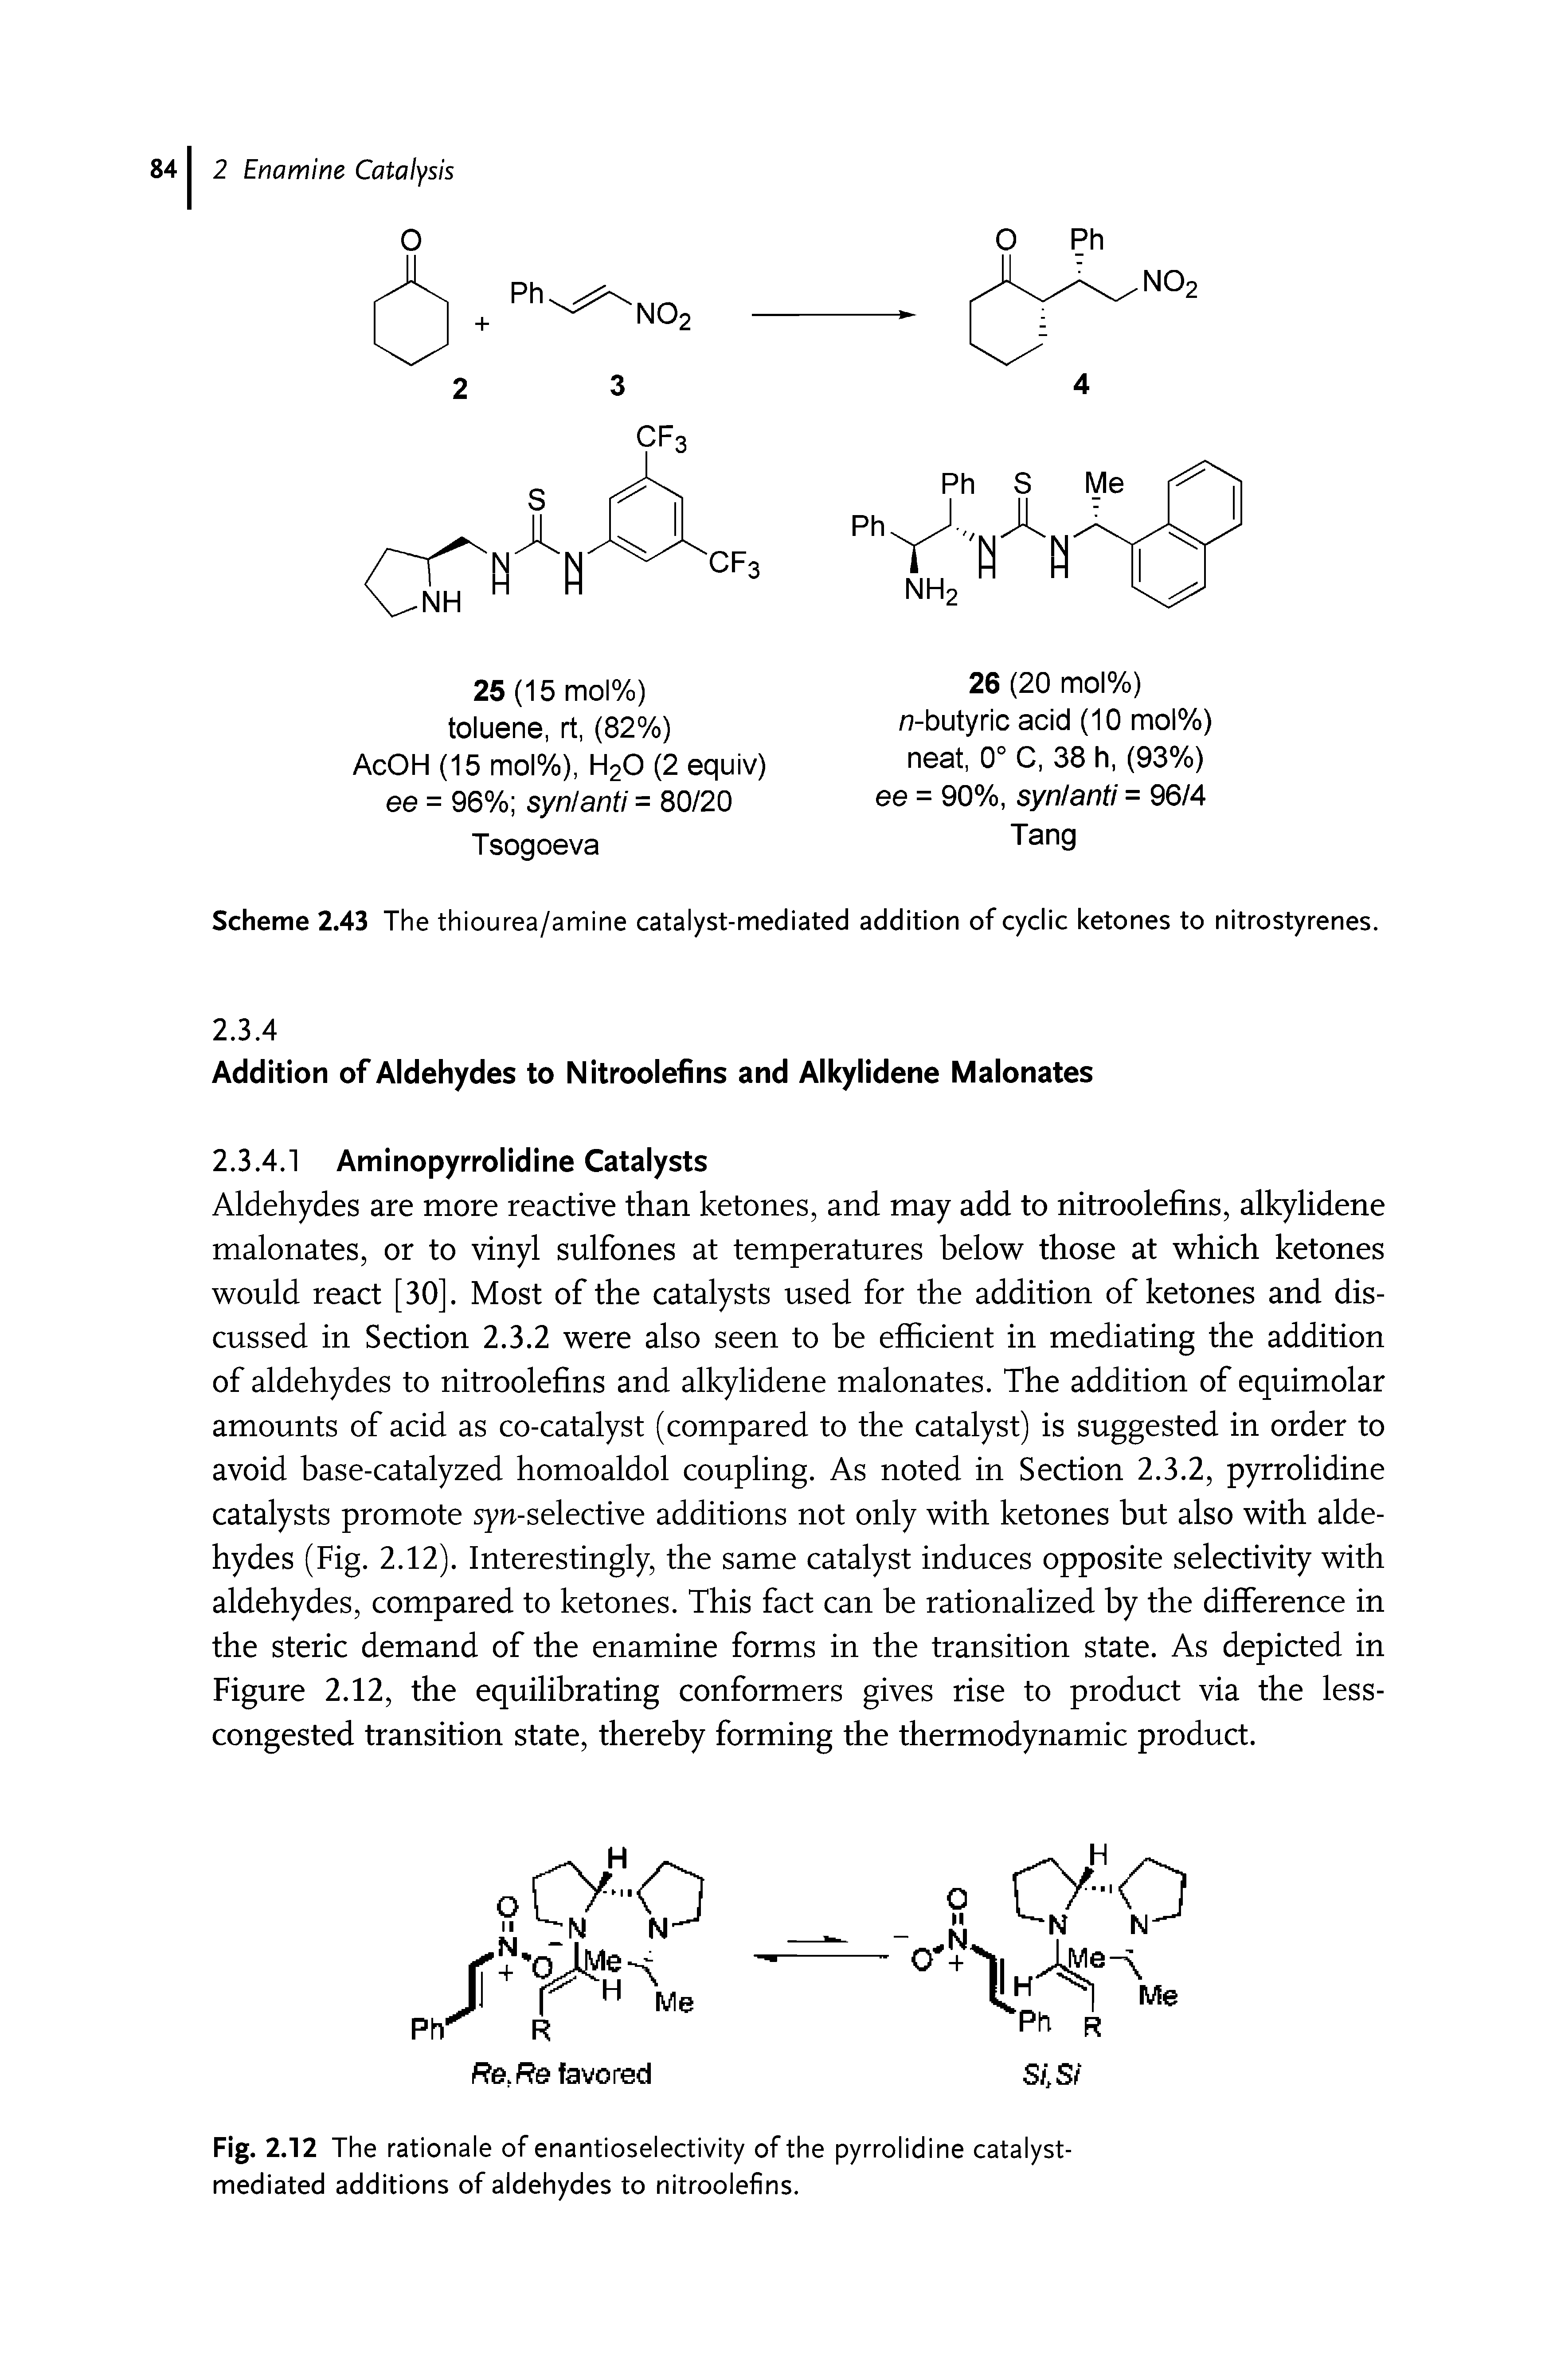 Fig. 2.12 The rationale of enantioselectivity of the pyrrolidine catalyst-mediated additions of aldehydes to nitroolefins.